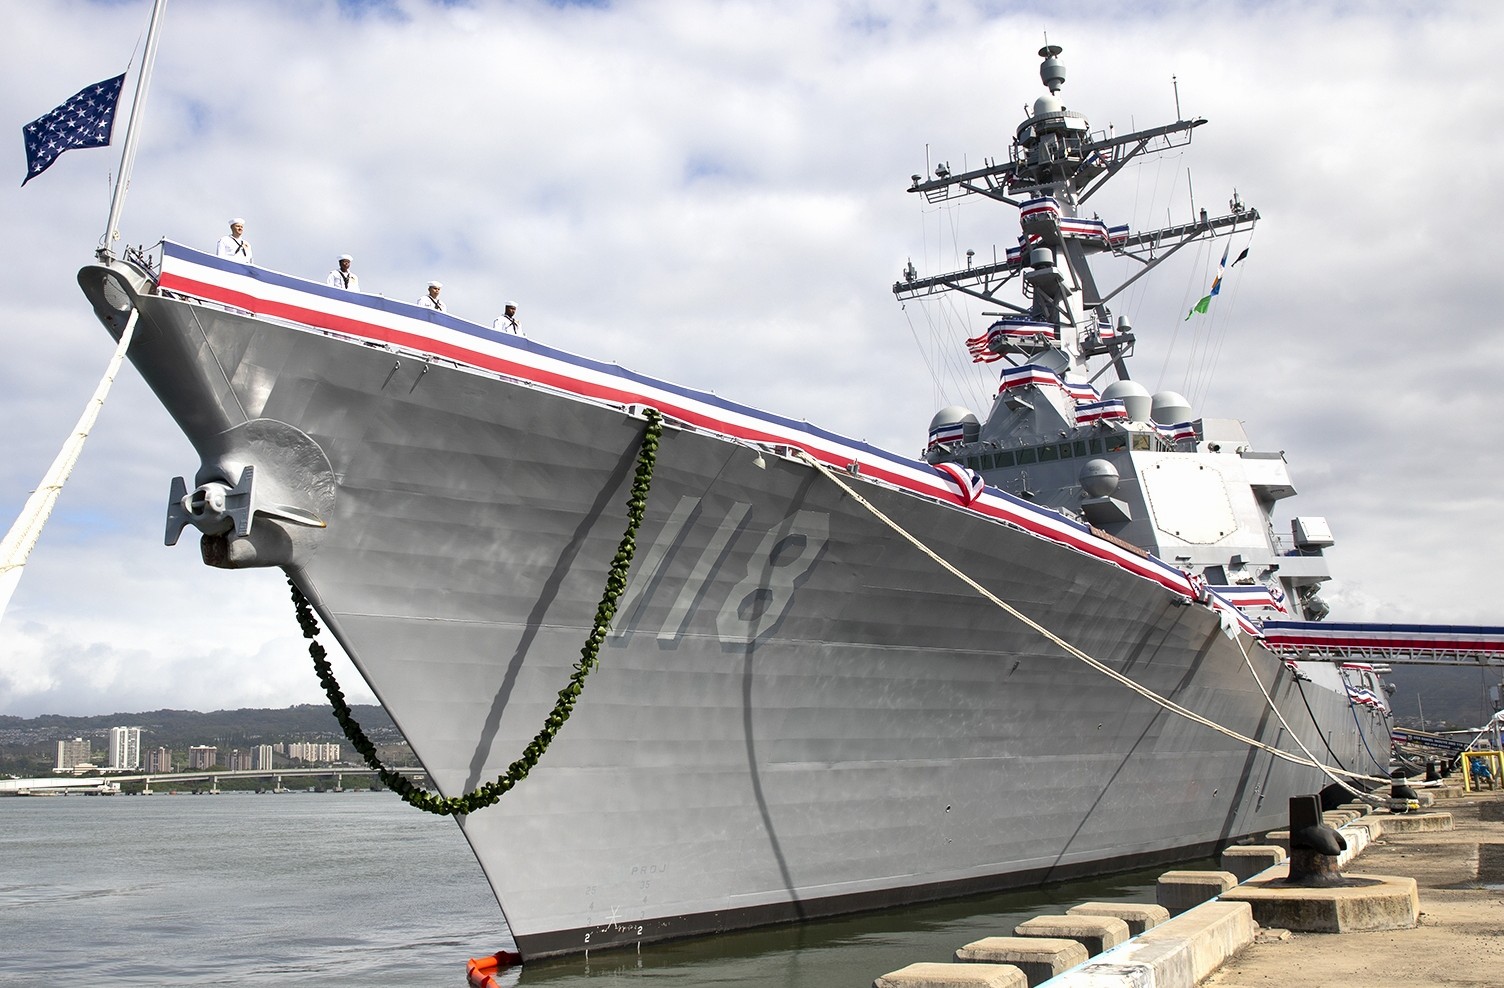 ddg-118 uss daniel inouye arleigh burke class guided missile destroyer us navy commissioning ceremony joint base pearl harbor hickam hawaii 27